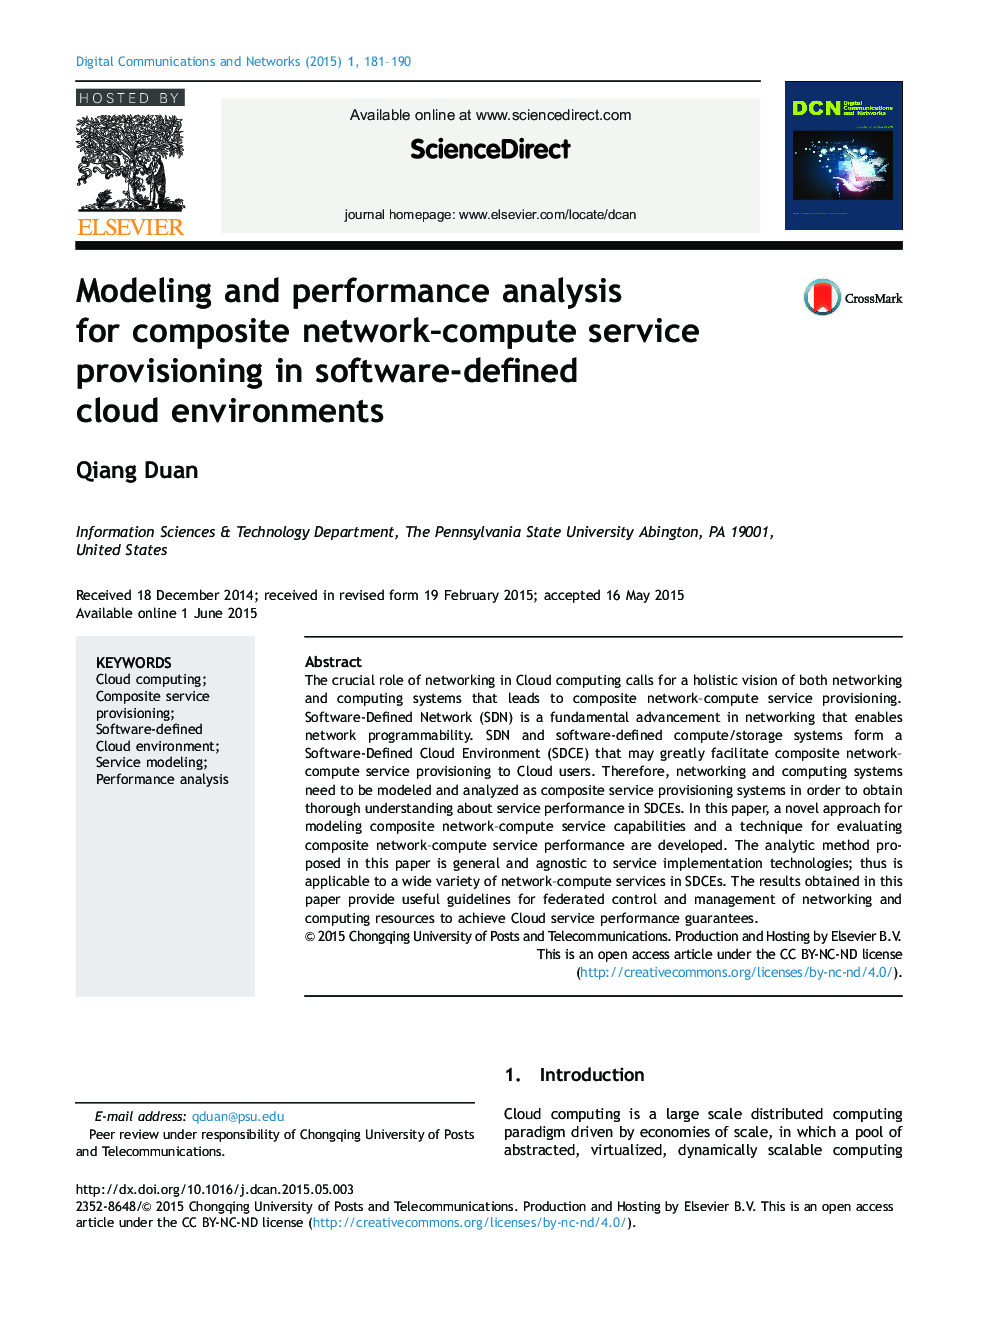 Modeling and performance analysis for composite network–compute service provisioning in software-defined cloud environments 